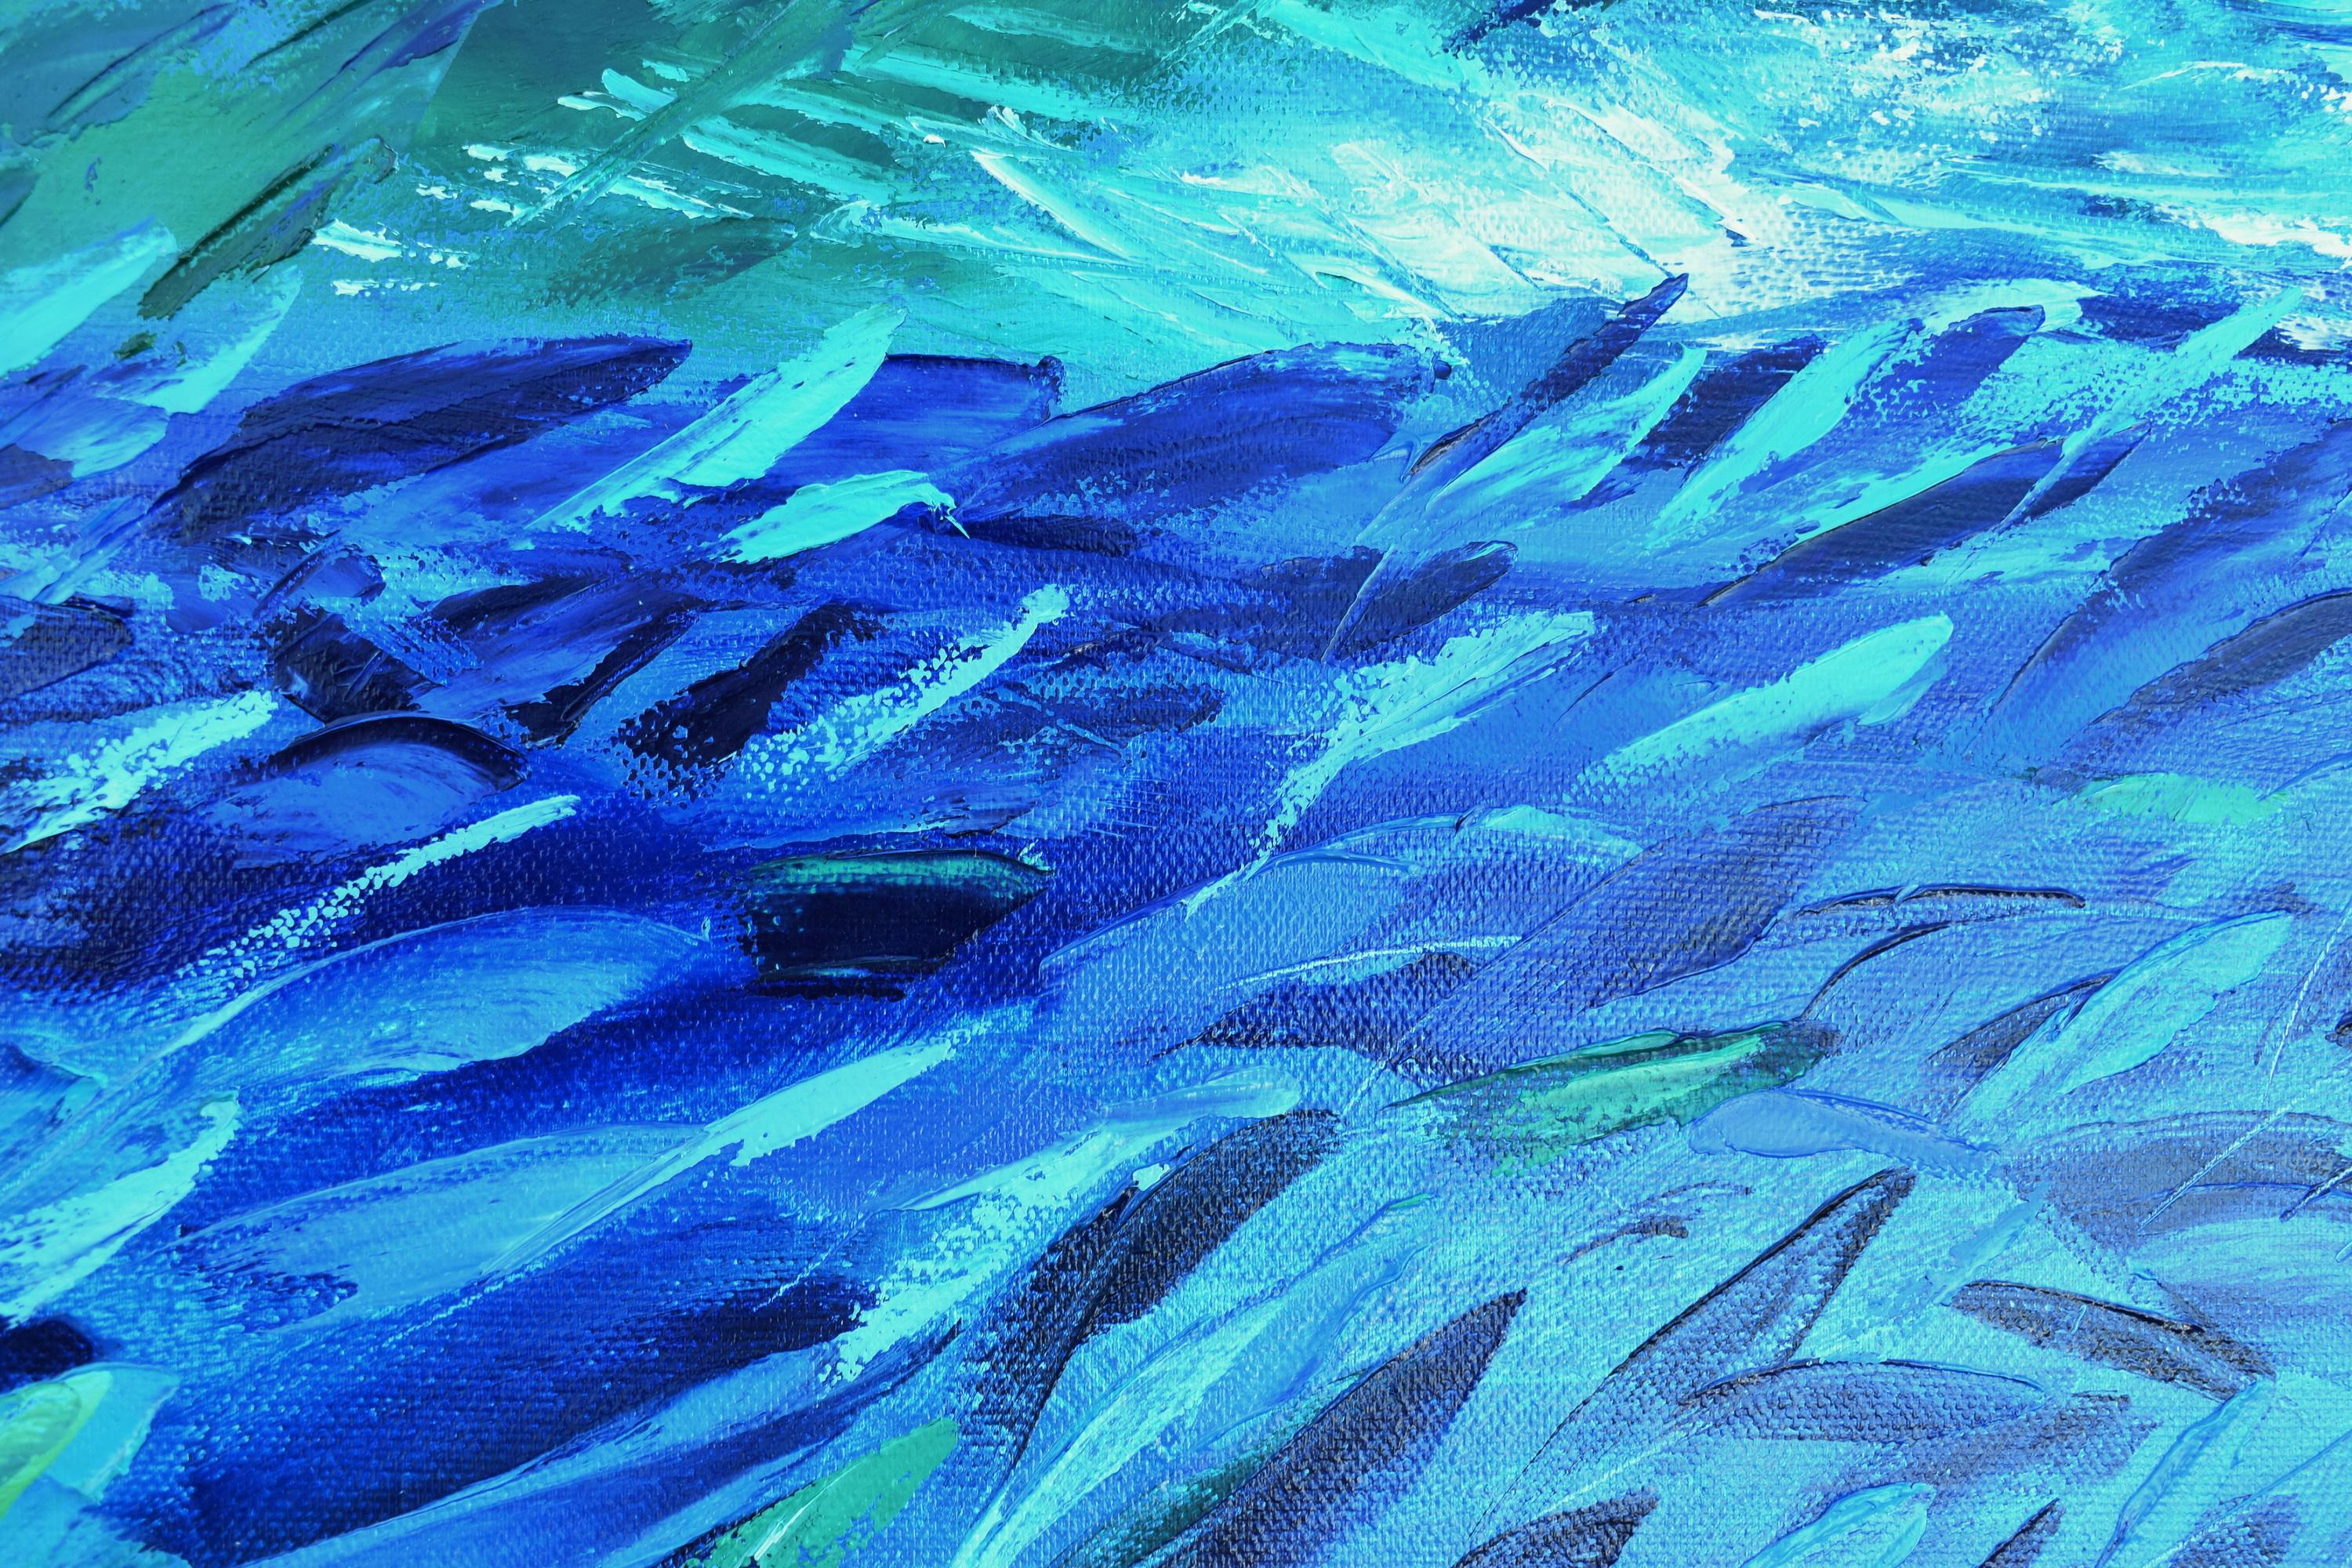 Fish Stream in Waves original oil painting by Olga Nikitina

Title: Fish in Waves
Size: 24x36 inches
Materials: cotton canvas, stretched on wooden frame, READY to HANG
Shipping:  gallery standards packaging, courier shipping with tracking number.

